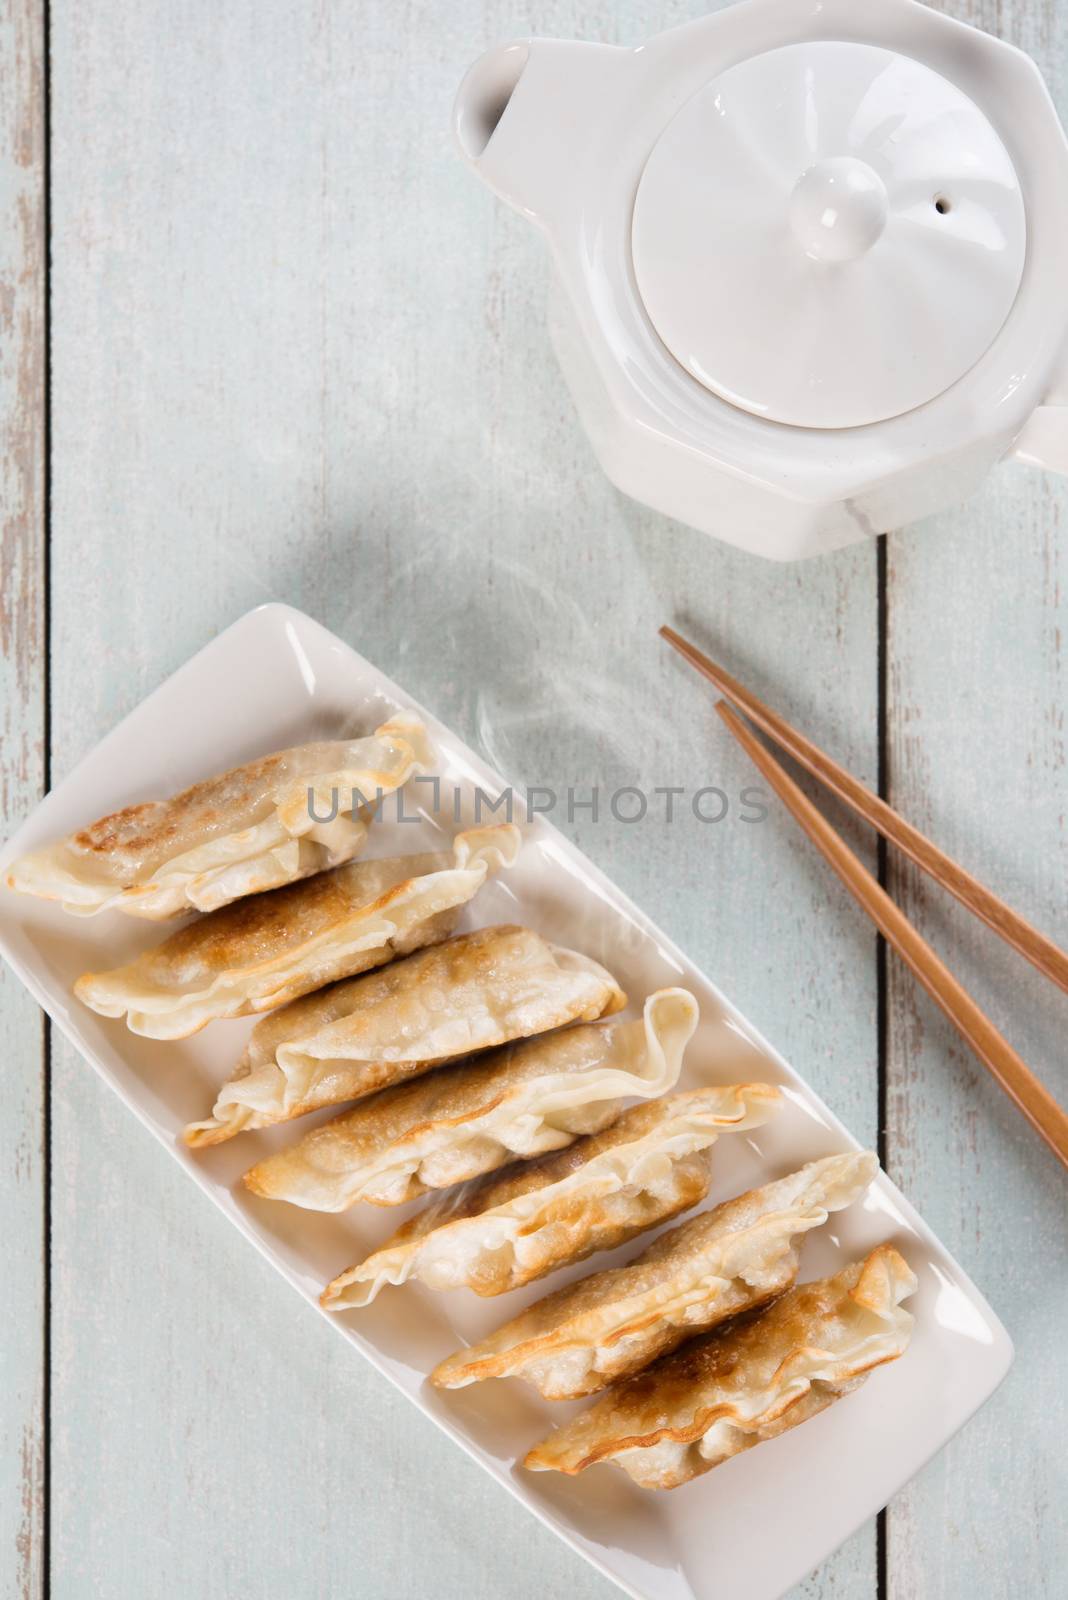 Top view fresh pan fried dumplings on plate with hot steams. Asian cuisine on rustic vintage wooden background.